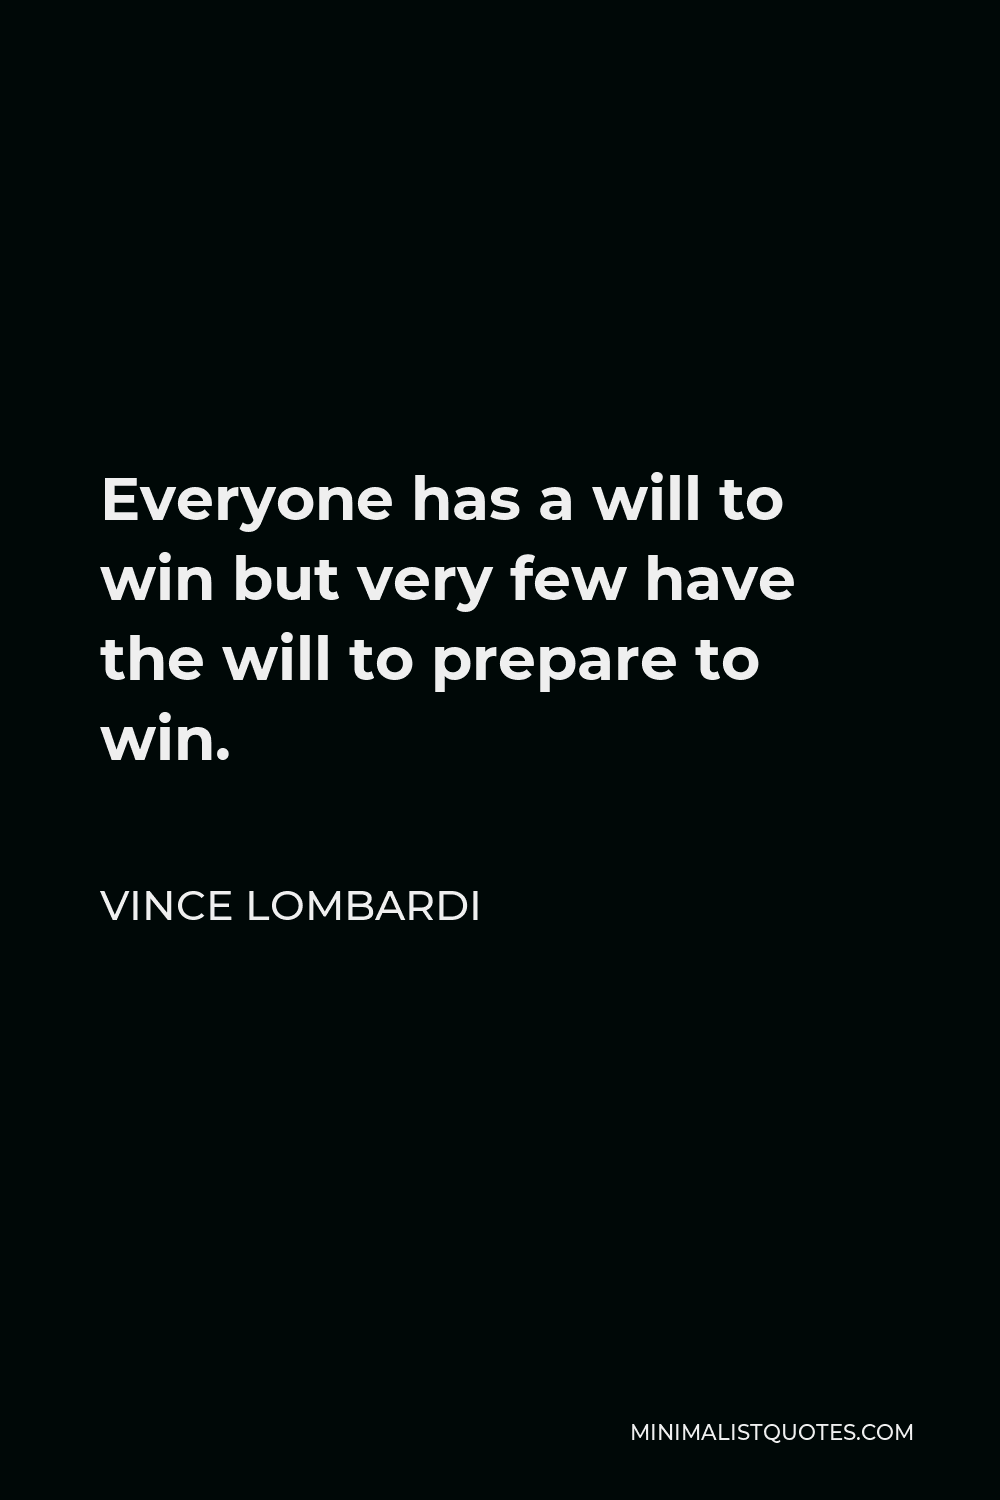 Vince Lombardi Quote: Everyone has a will to win but very few have the ...